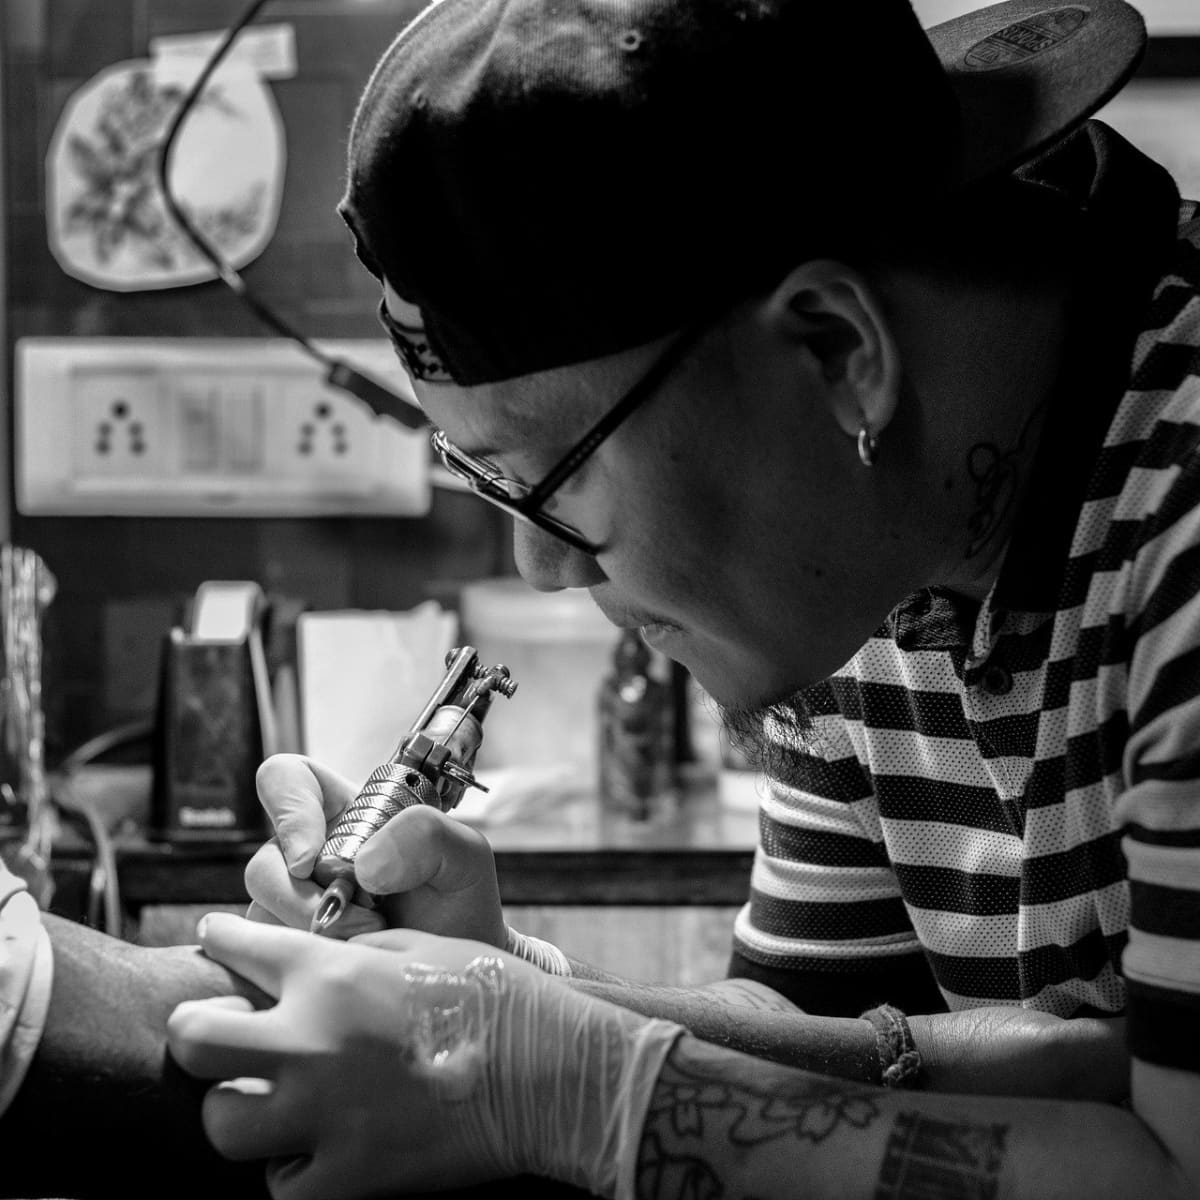 Woman Sues Black Ink Studio for Infected Tattoo - The Source